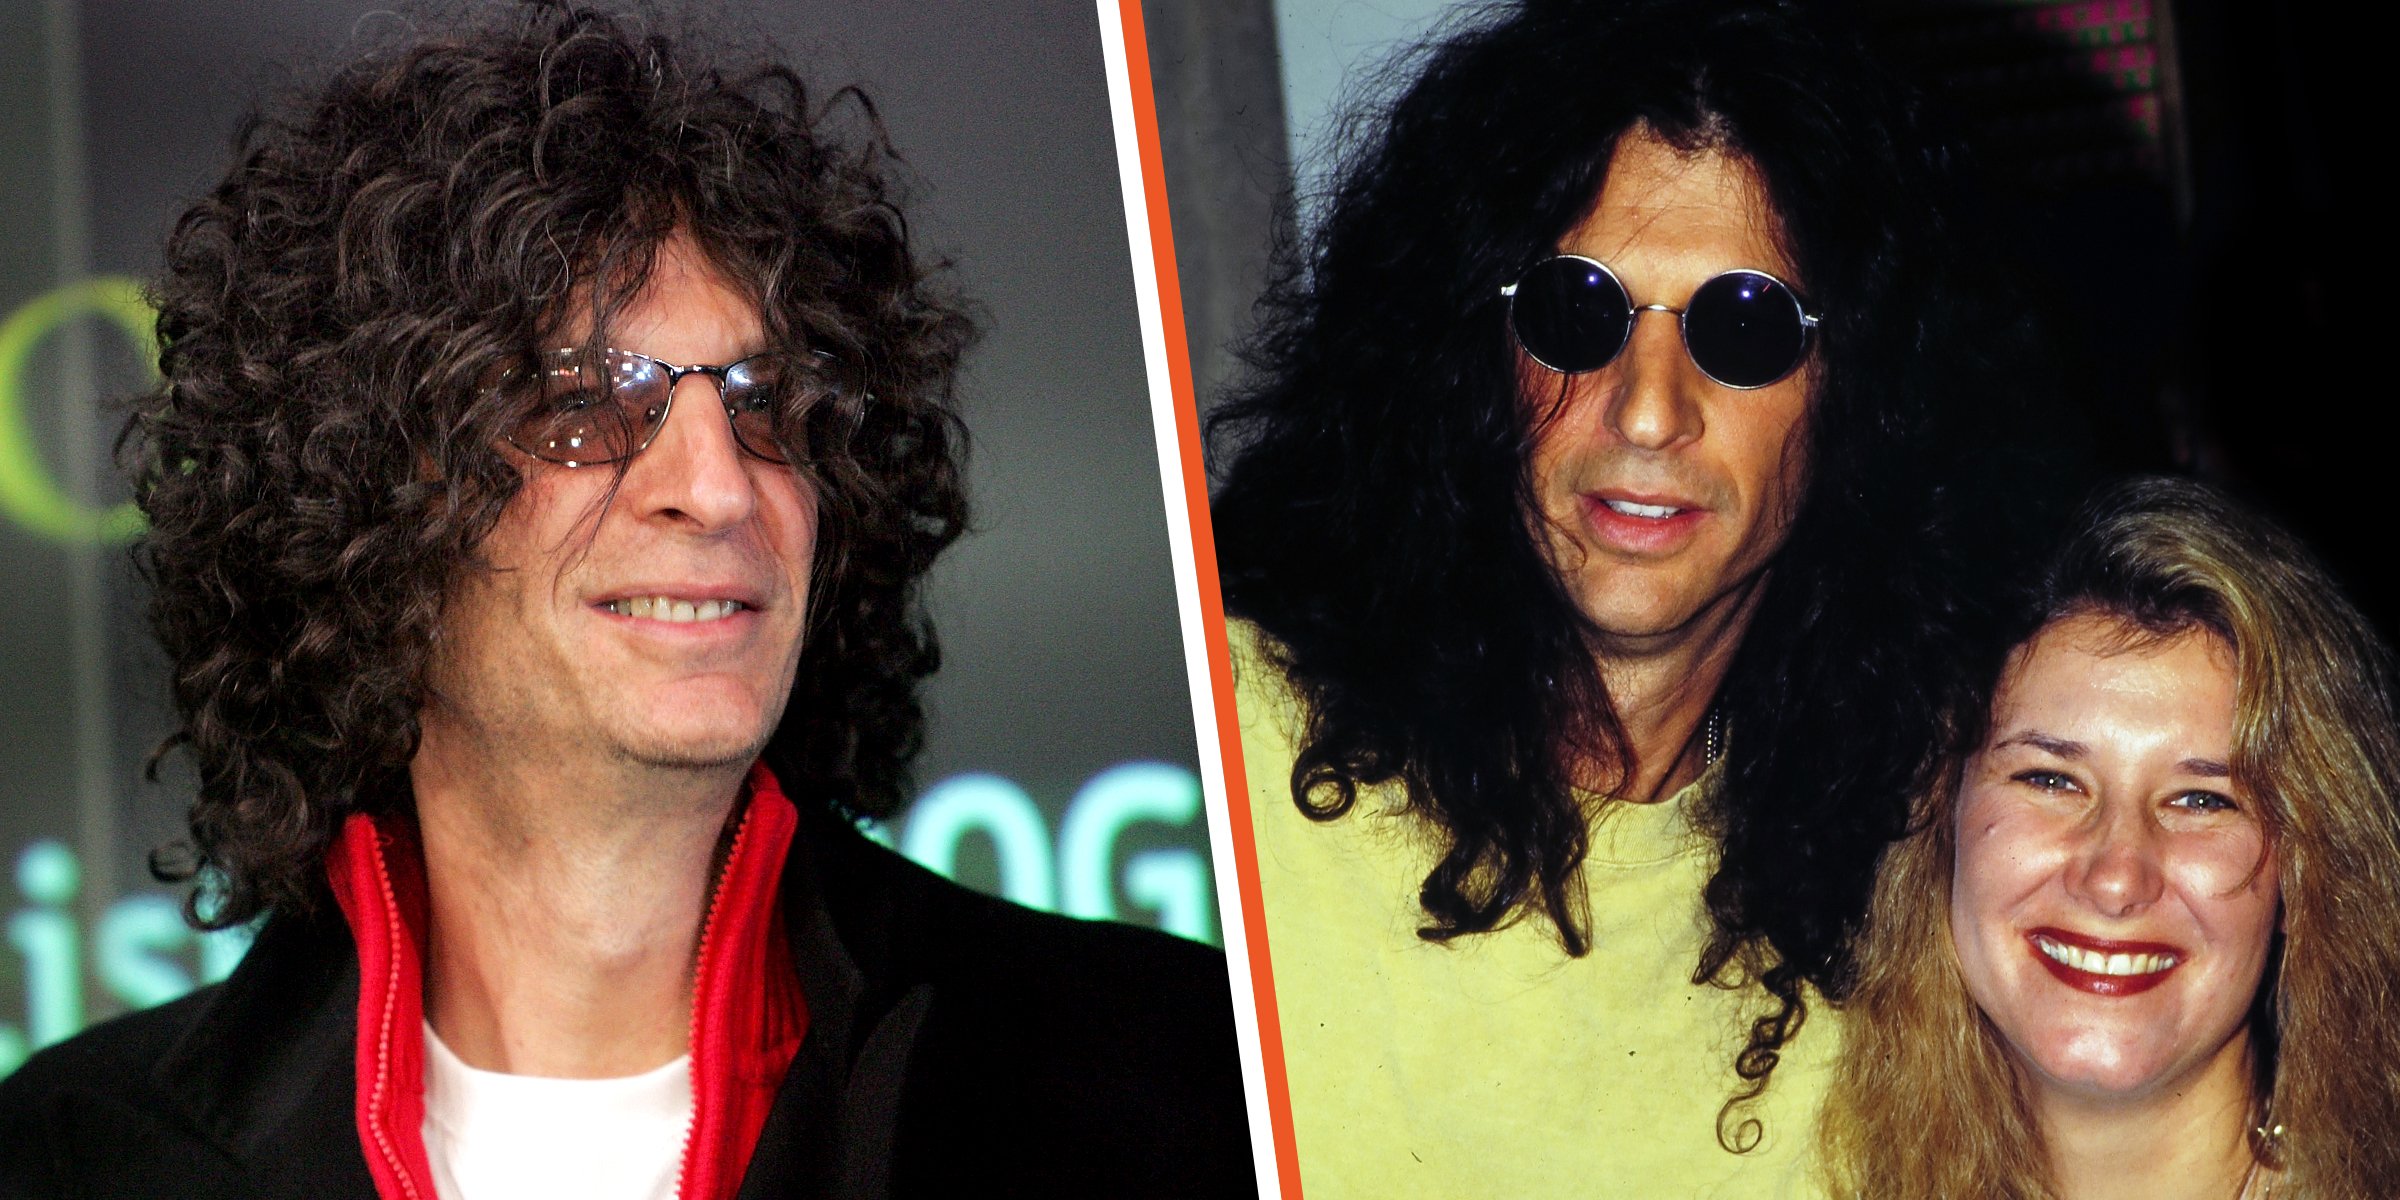 Alison Berns Is Howard Stern's Exspouse Inside Their Marriage and Divorce